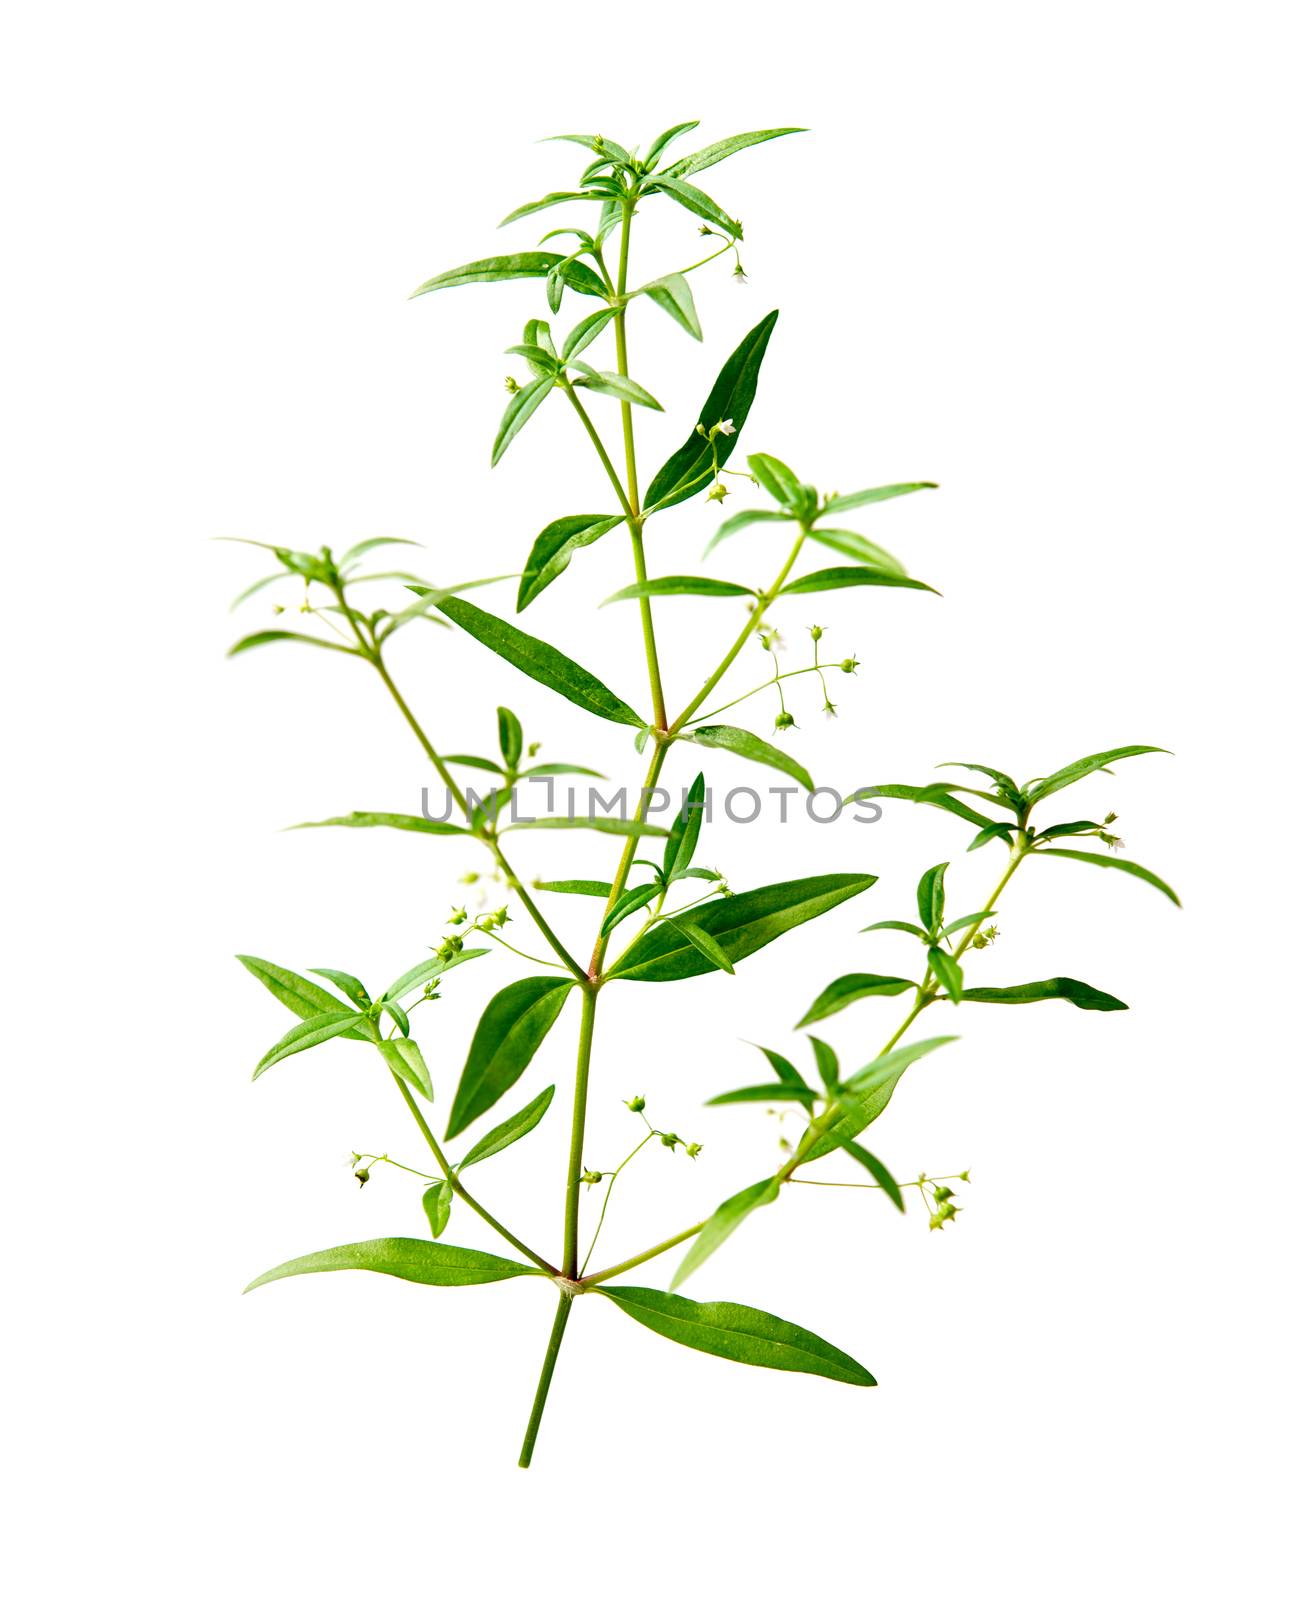 Hedyotis diffusa also known as white flower snake tongue grass is a kind of herb used in traditional Chinese medicine, isolated on white background.